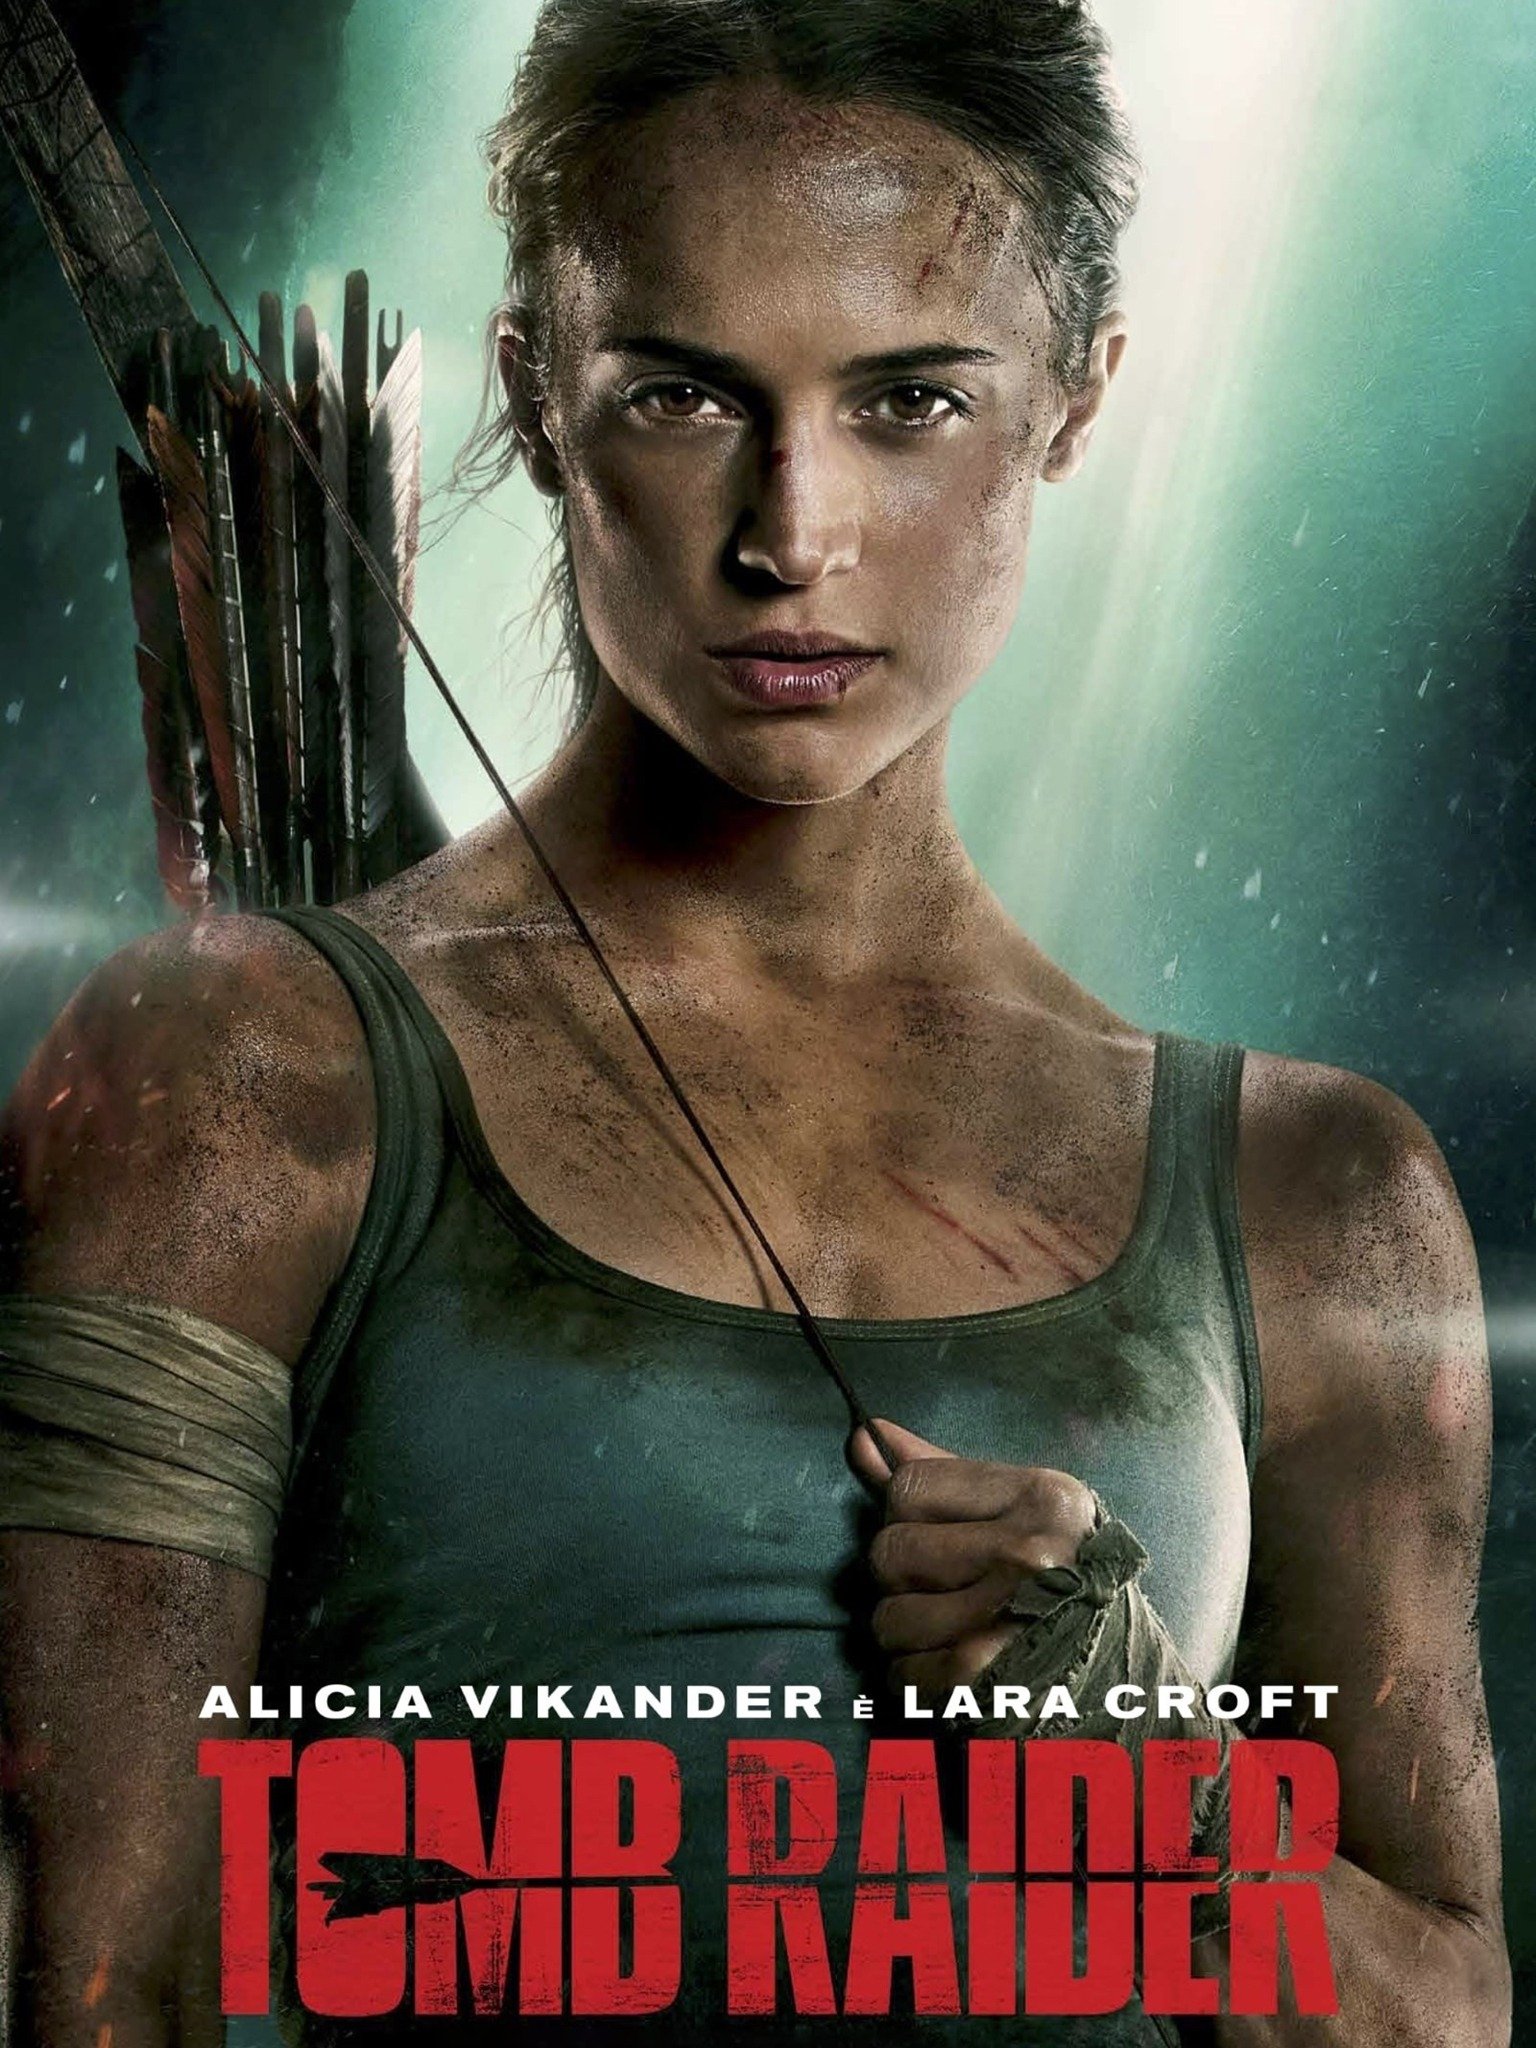 Tomb Raider Trailer 2 Trailers And Videos Rotten Tomatoes